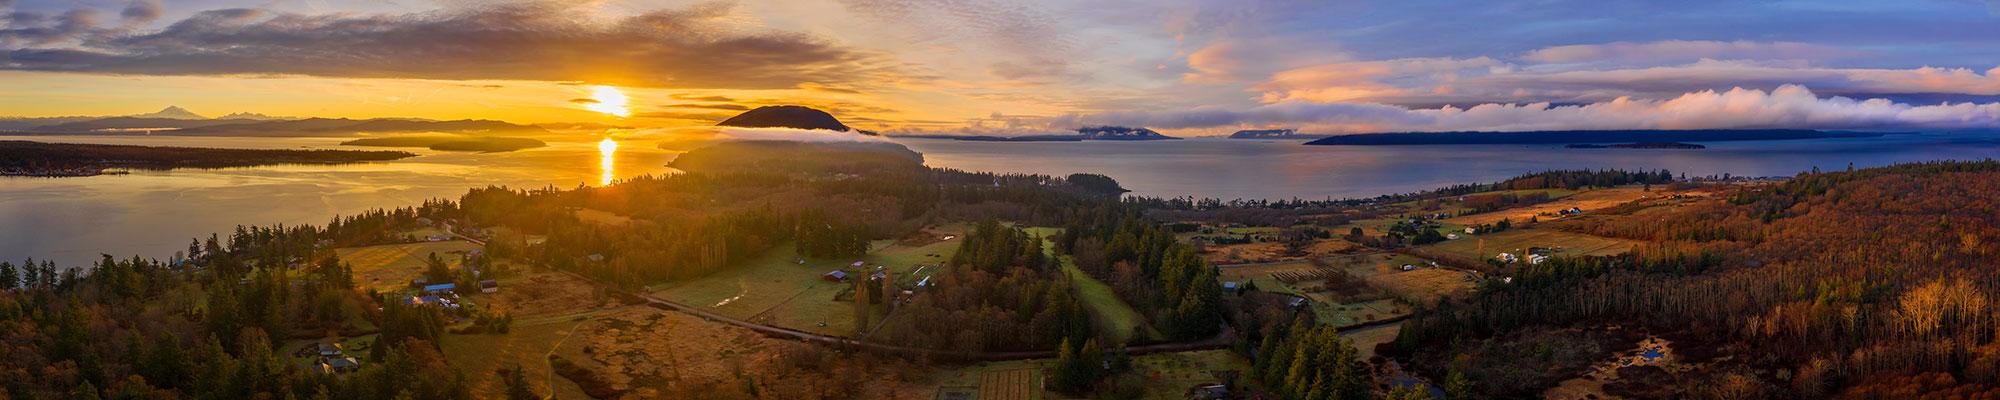 Arial view of Lummi island during a winter sunset